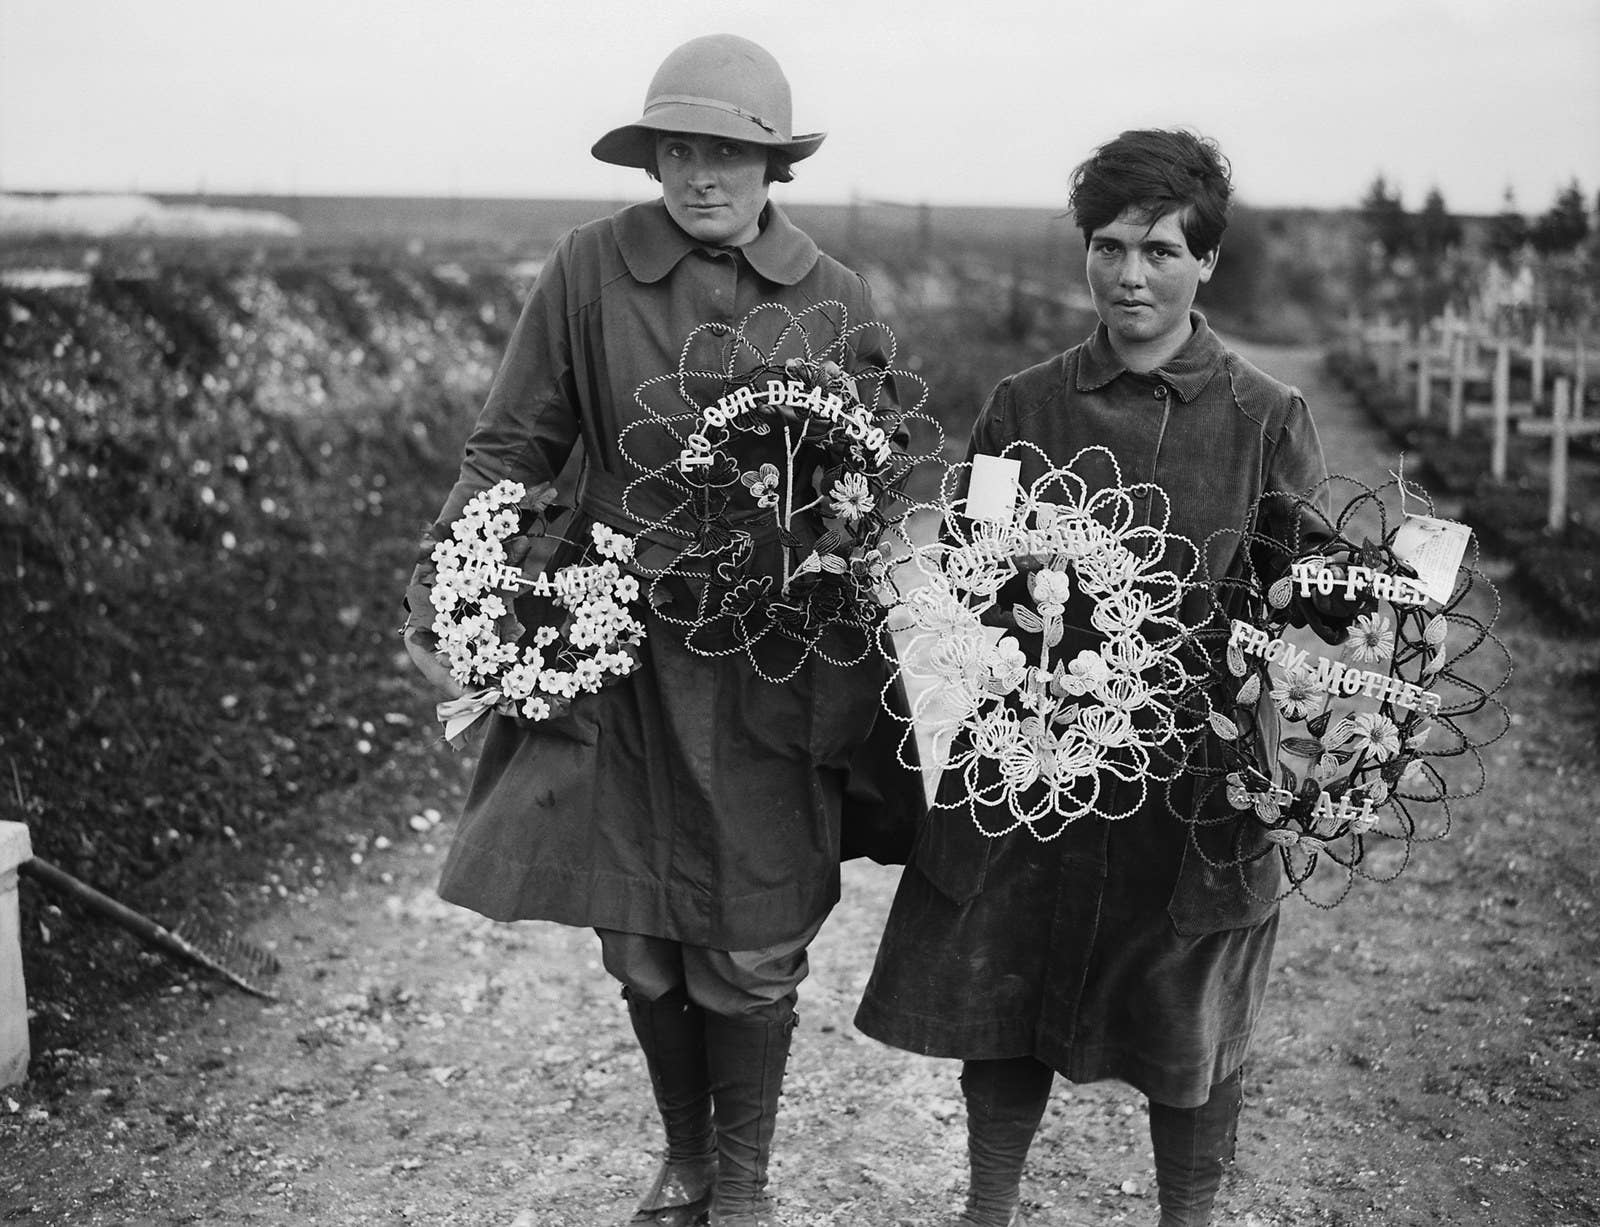 Two members of the Women&#x27;s Auxiliary Army Corps carrying wreaths to place on the graves of British soldiers buried at Abbeville, France, 1918.